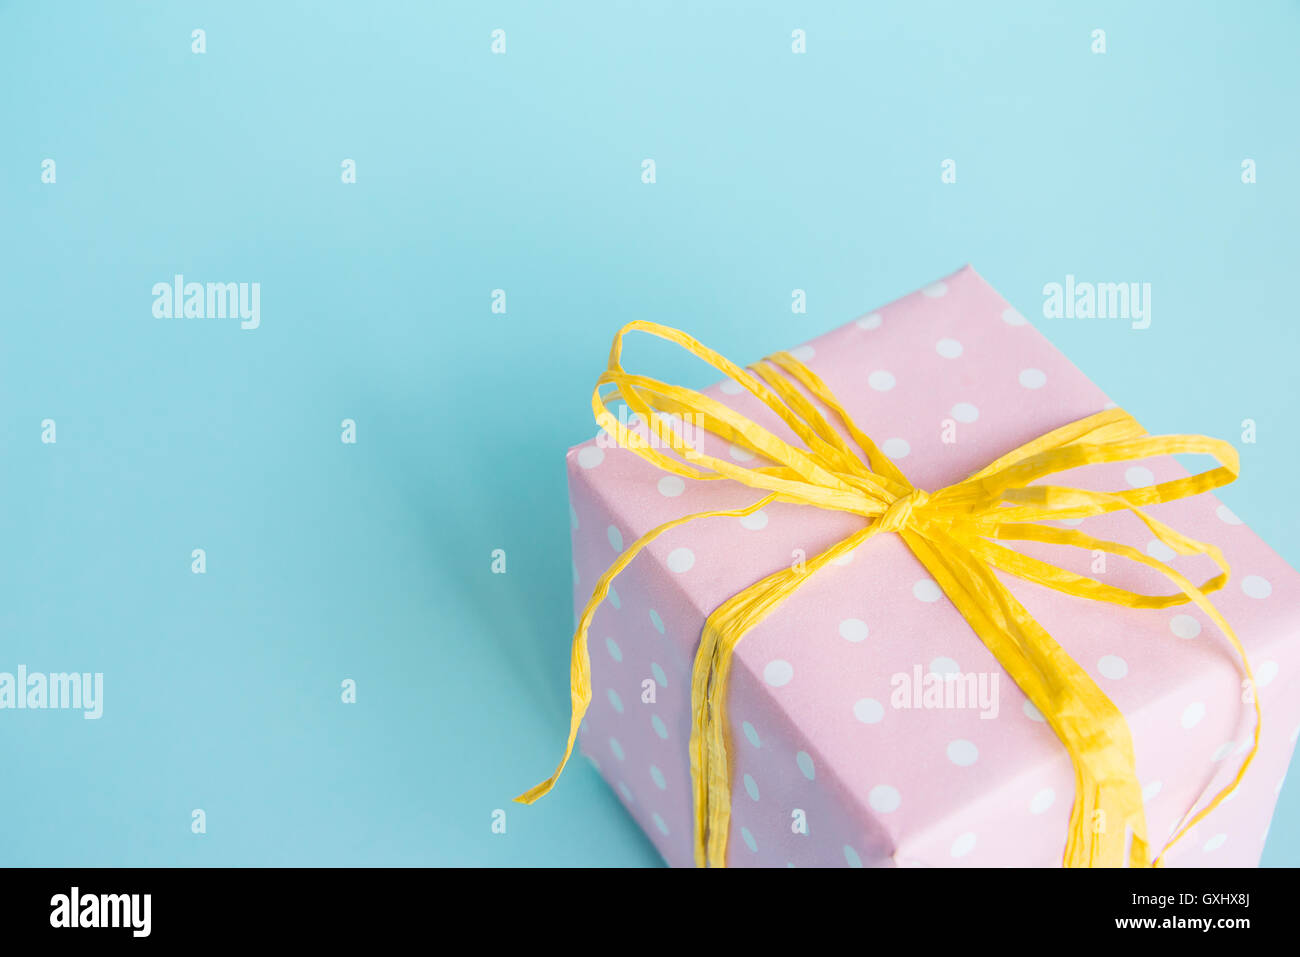 Top view of a gift box wrapped in pink dotted paper and tied yellow bow over light blue background. Stock Photo